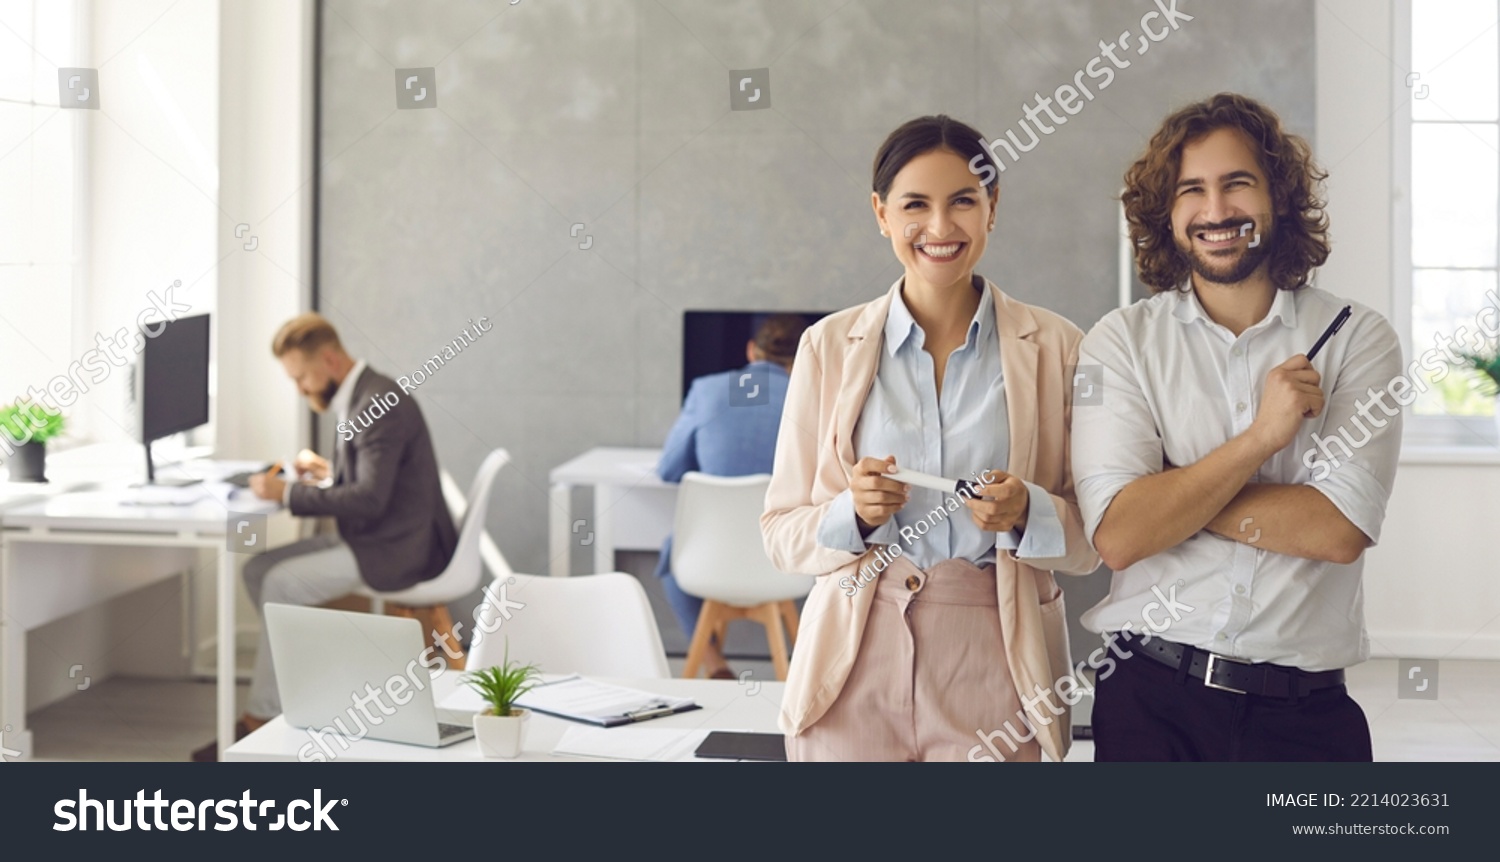 Happy smiling young business people in modern office workplace. Banner background with portrait of two satisfied successful colleagues, team leaders, teammates, business partners and friends at work #2214023631